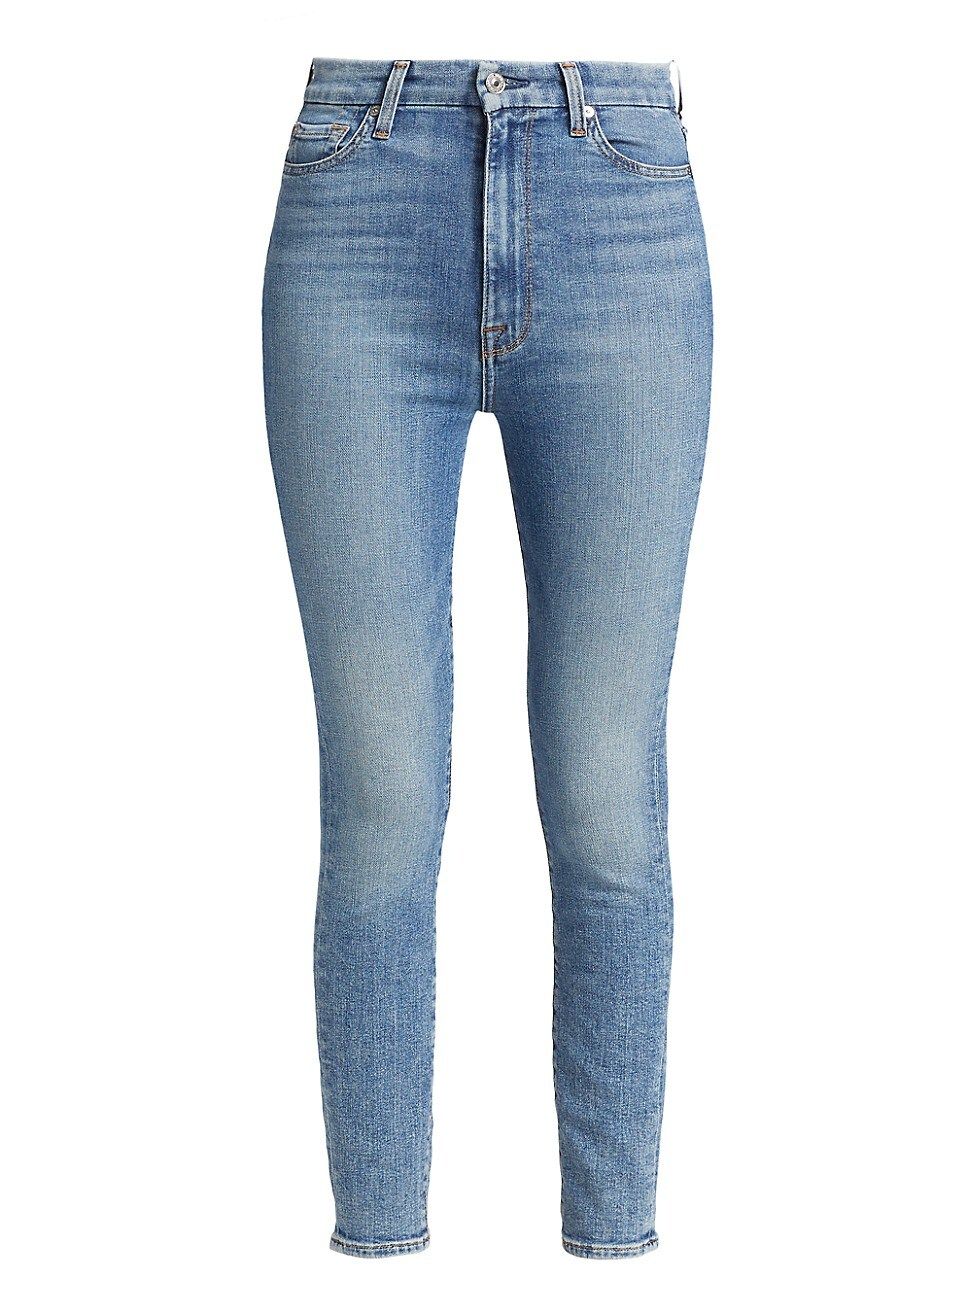 7 For All Mankind Women's Aubrey Ultra High-Rise Skinny Jeans - Sloan Vintage - Size 27 | Saks Fifth Avenue